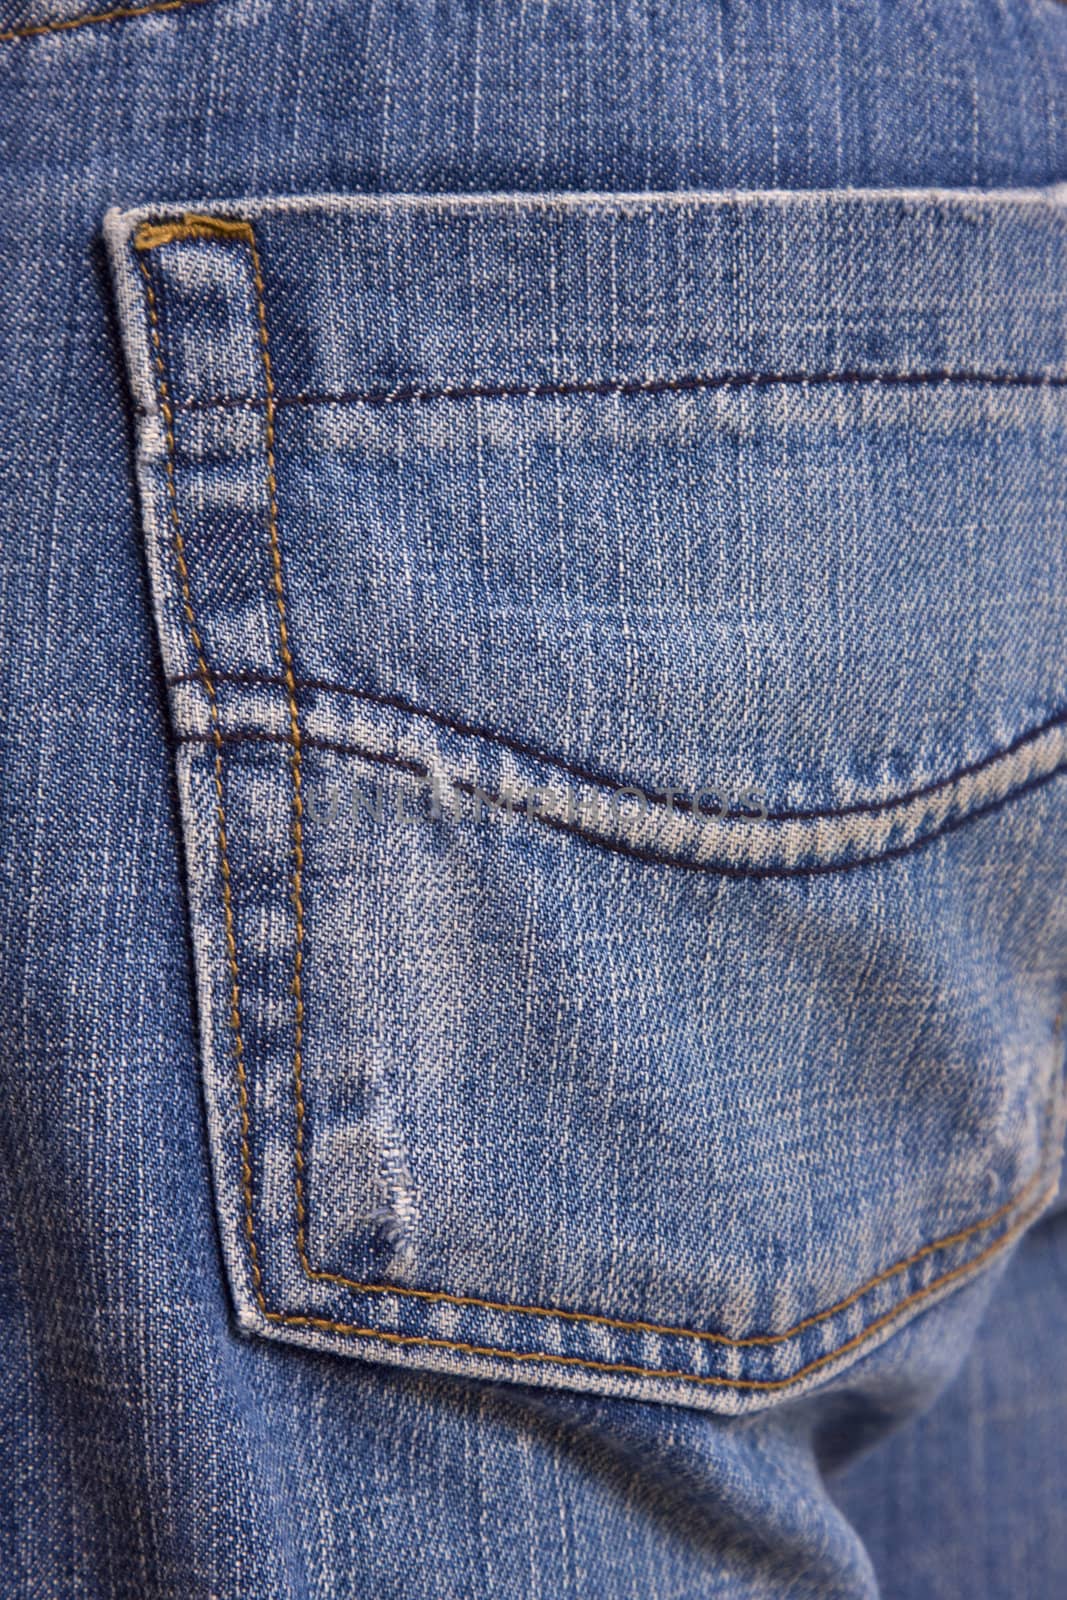 jeans pocket by jfcalheiros